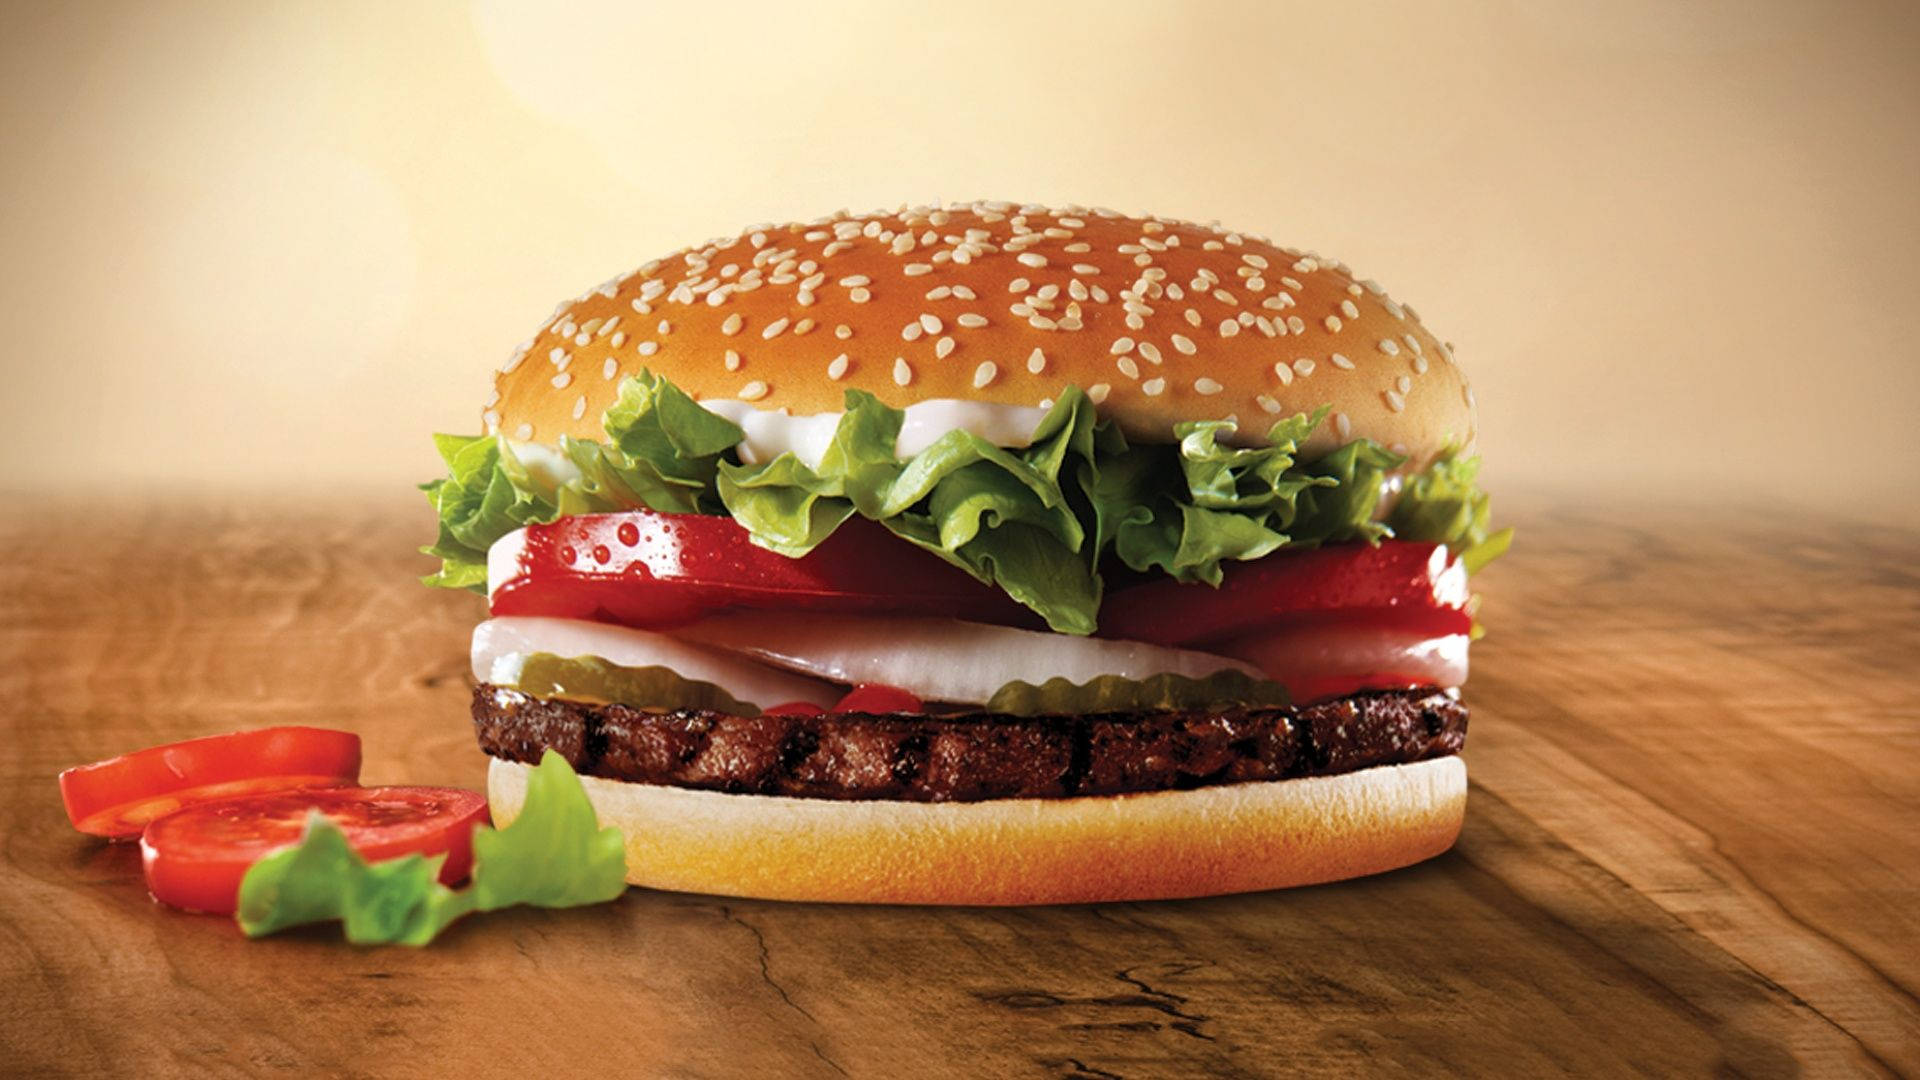 Satisfy Your Hunger With Burger King's Delectable Cheeseburger